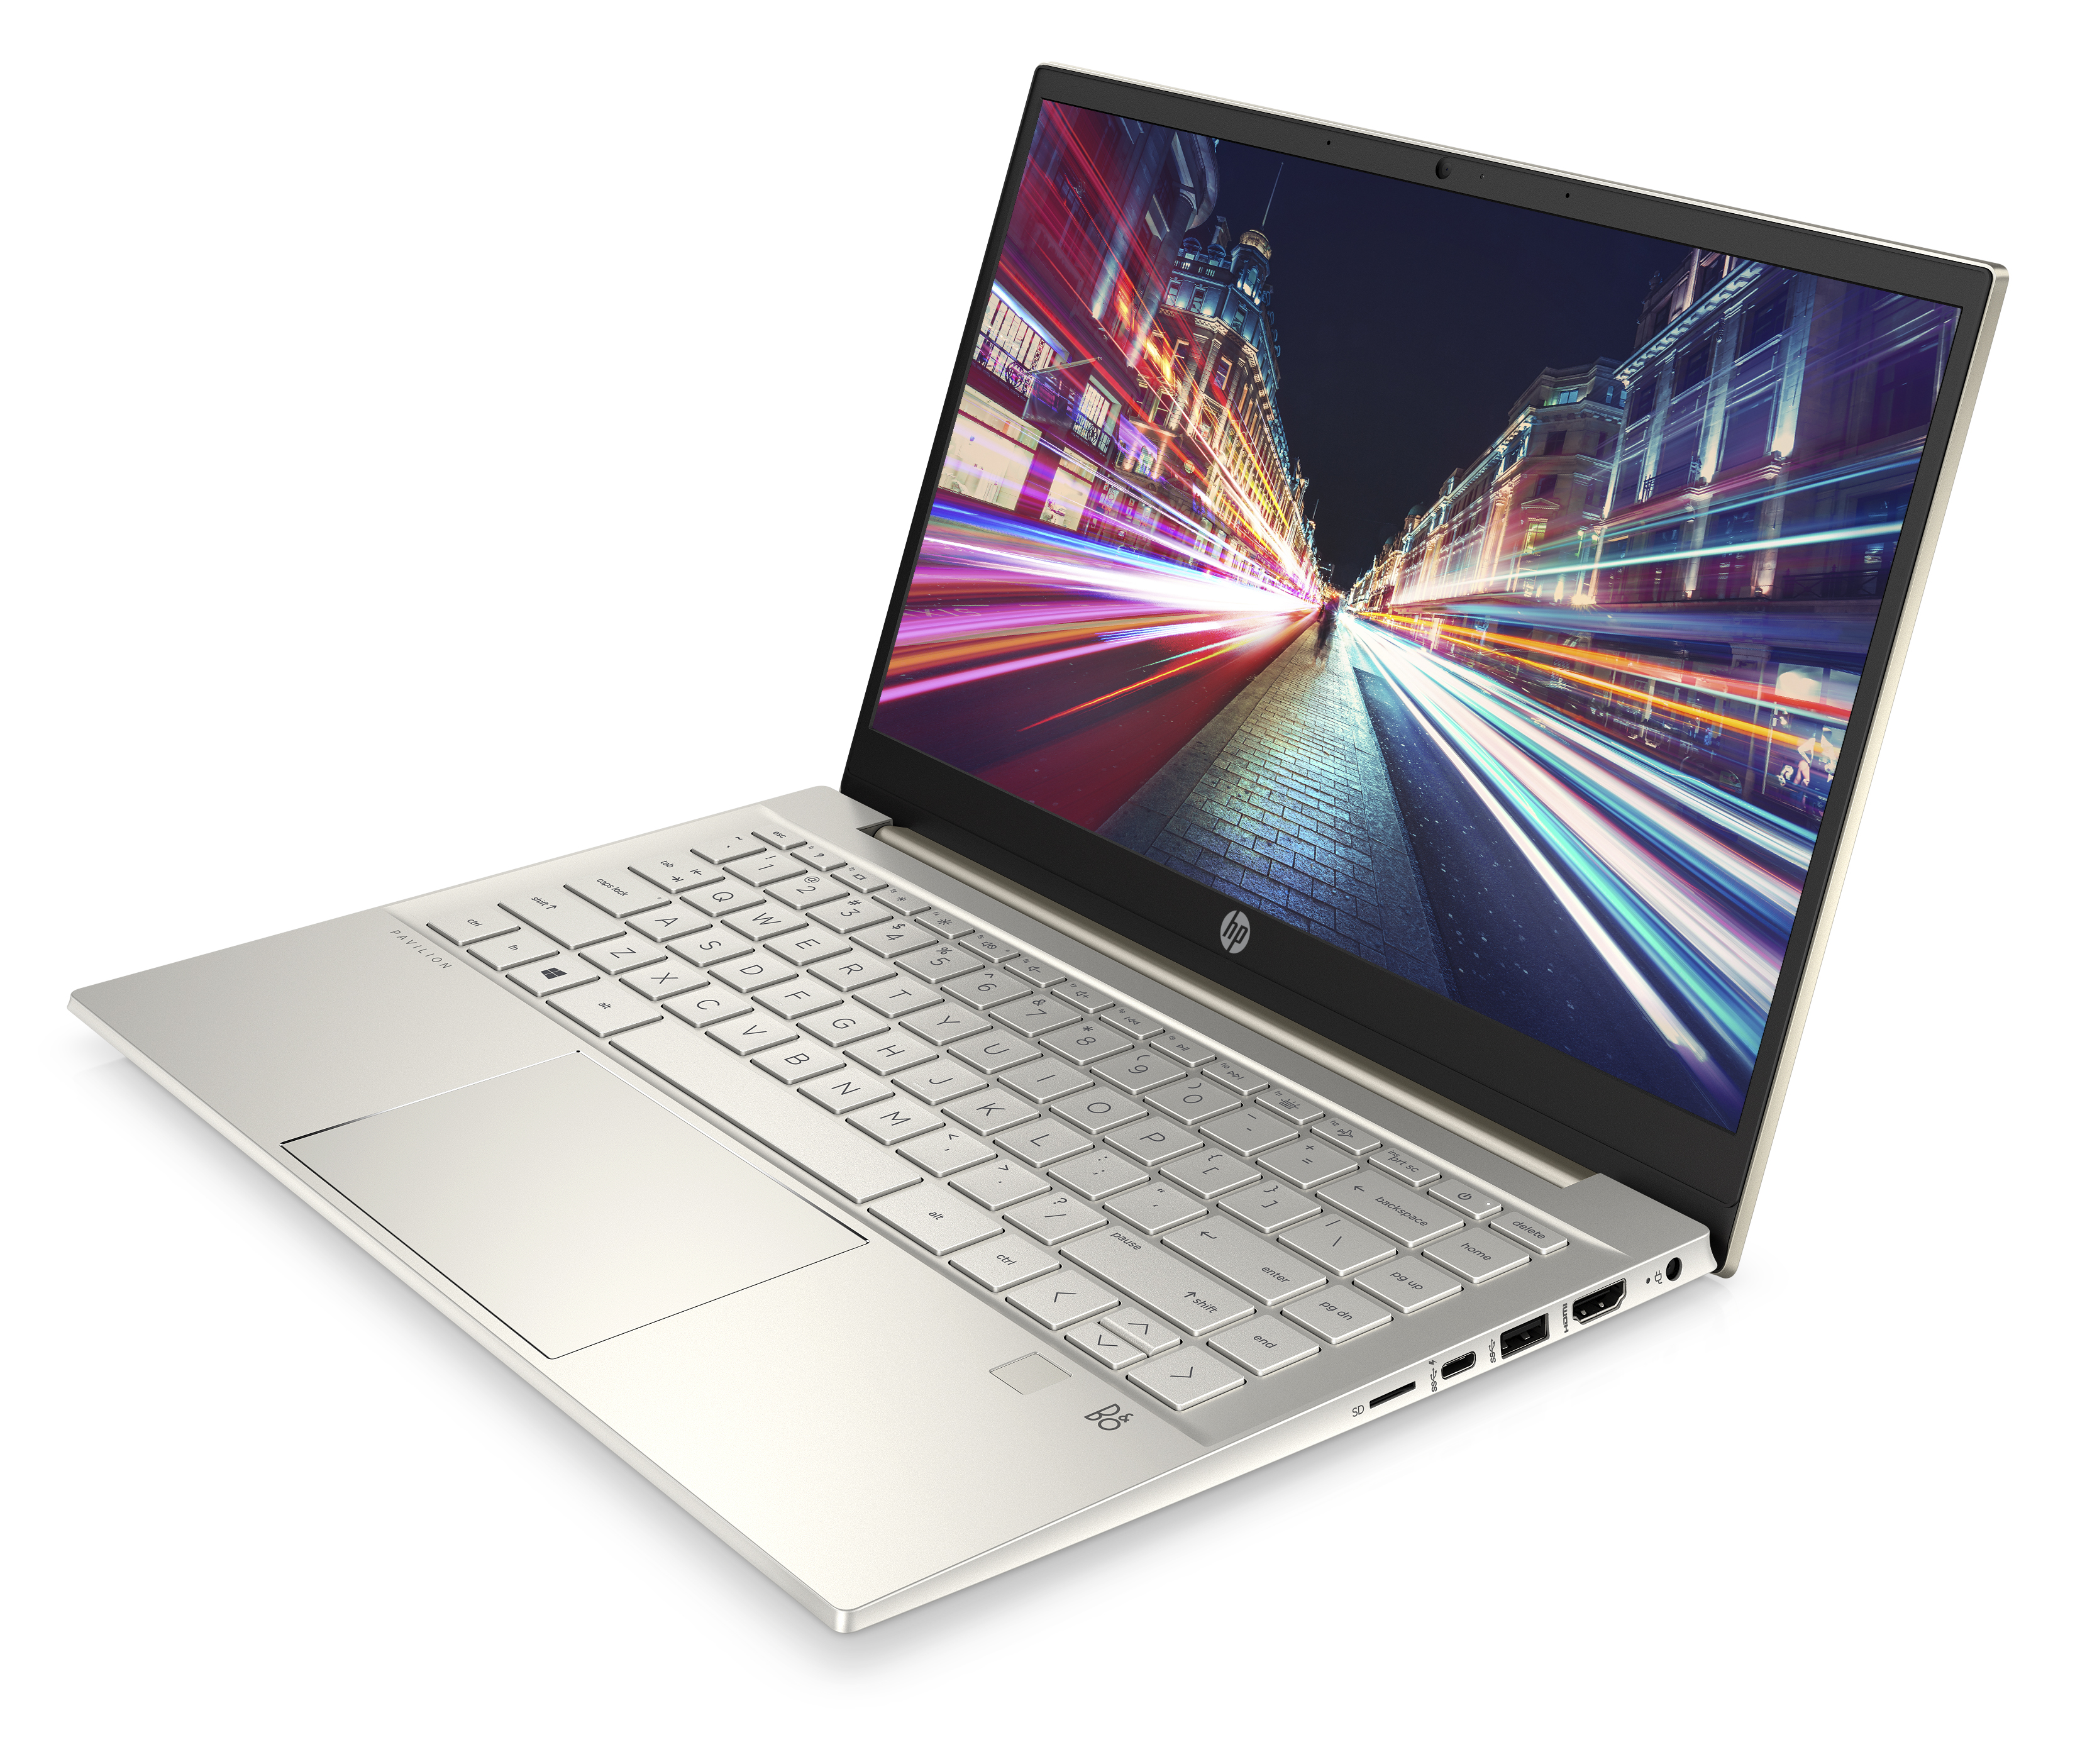 HP Pavilion 14 launched with Intel Tiger Lake processors, an 